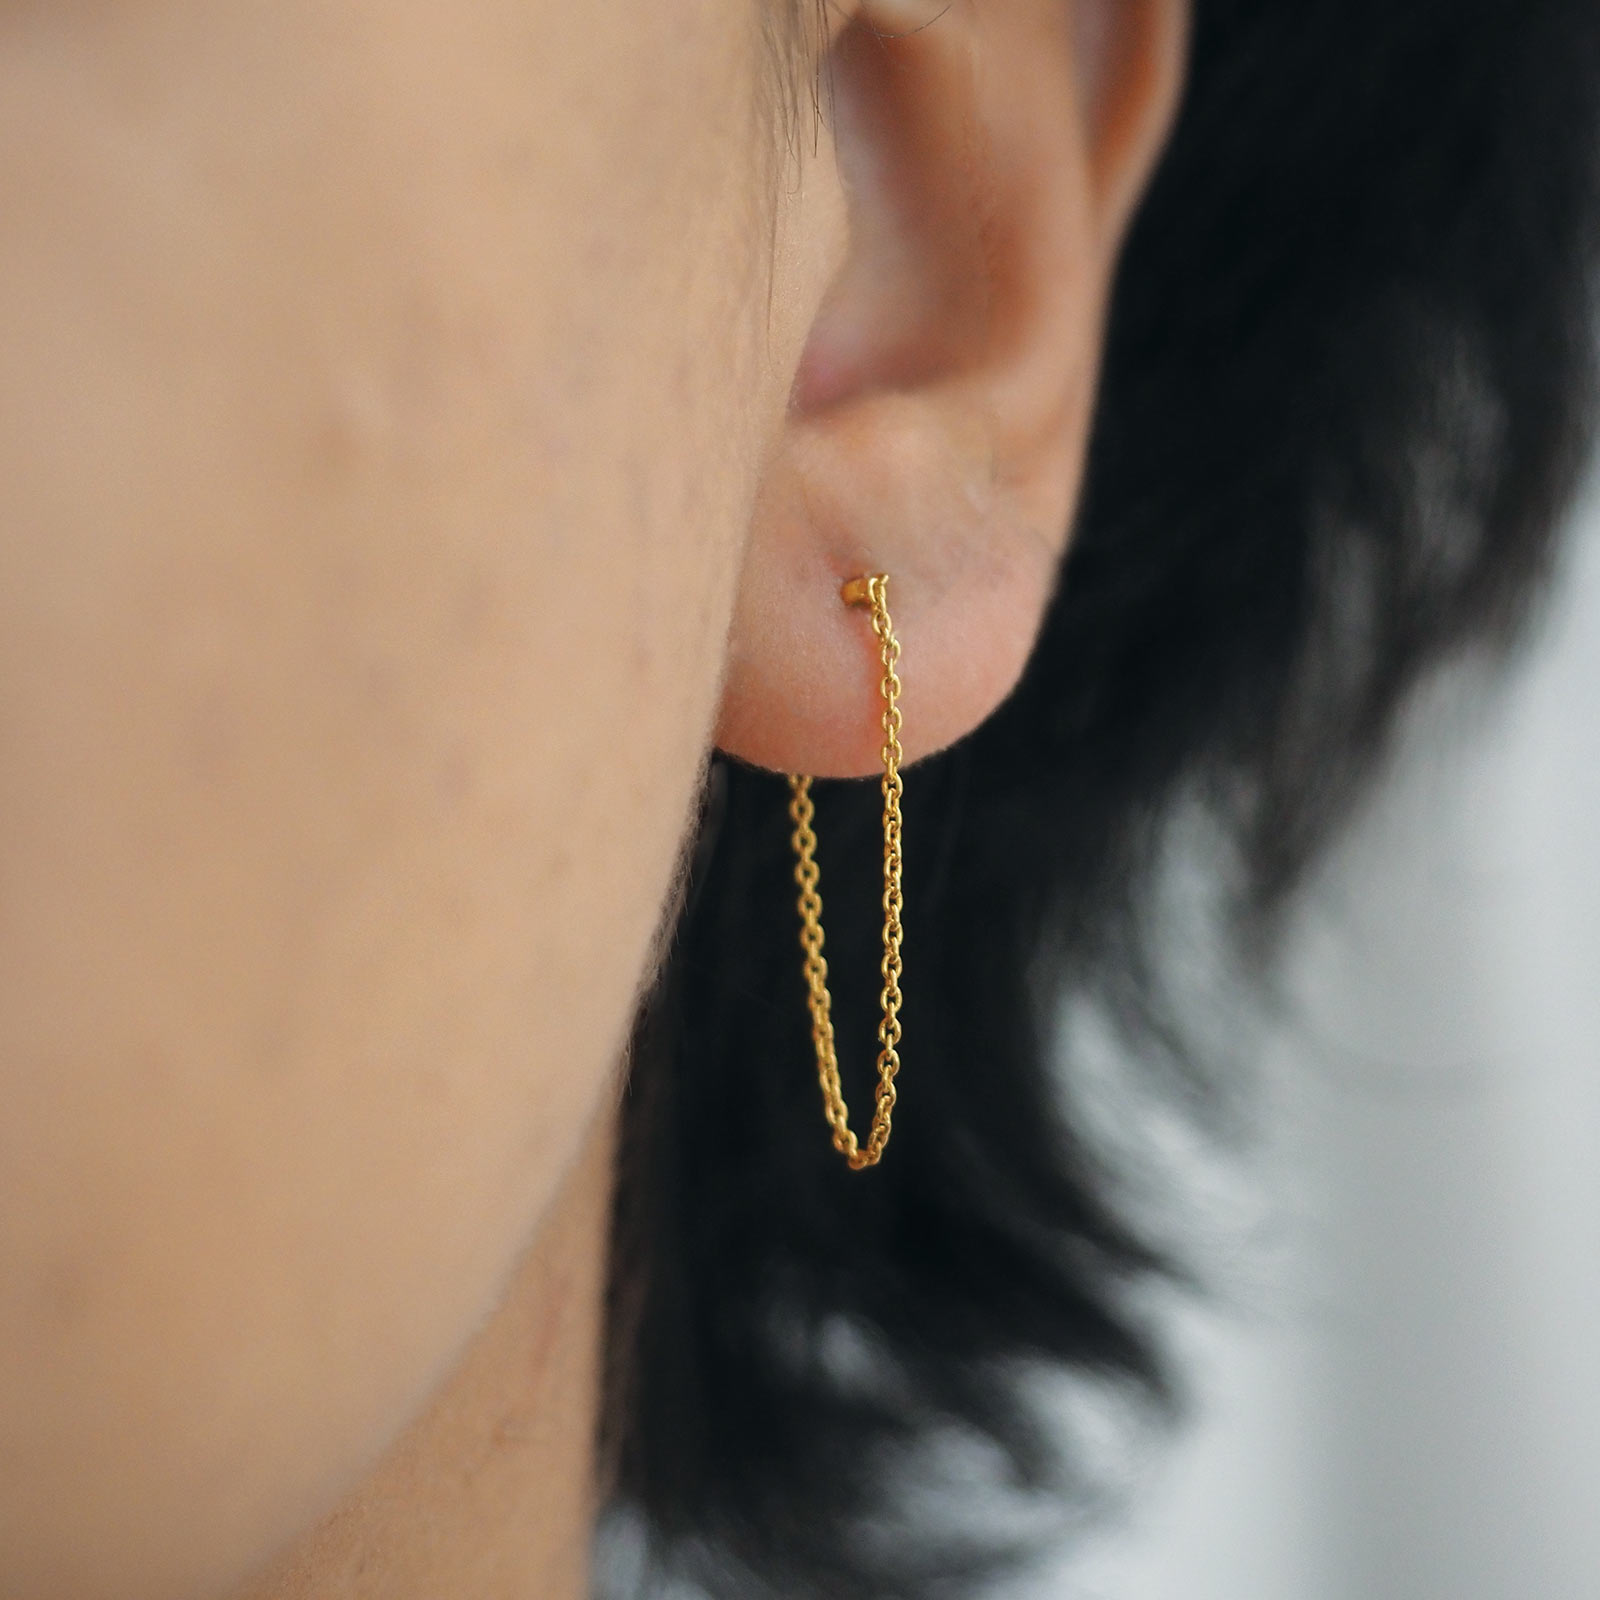 ASOS DESIGN earrings with tassel chain in gold tone | ASOS